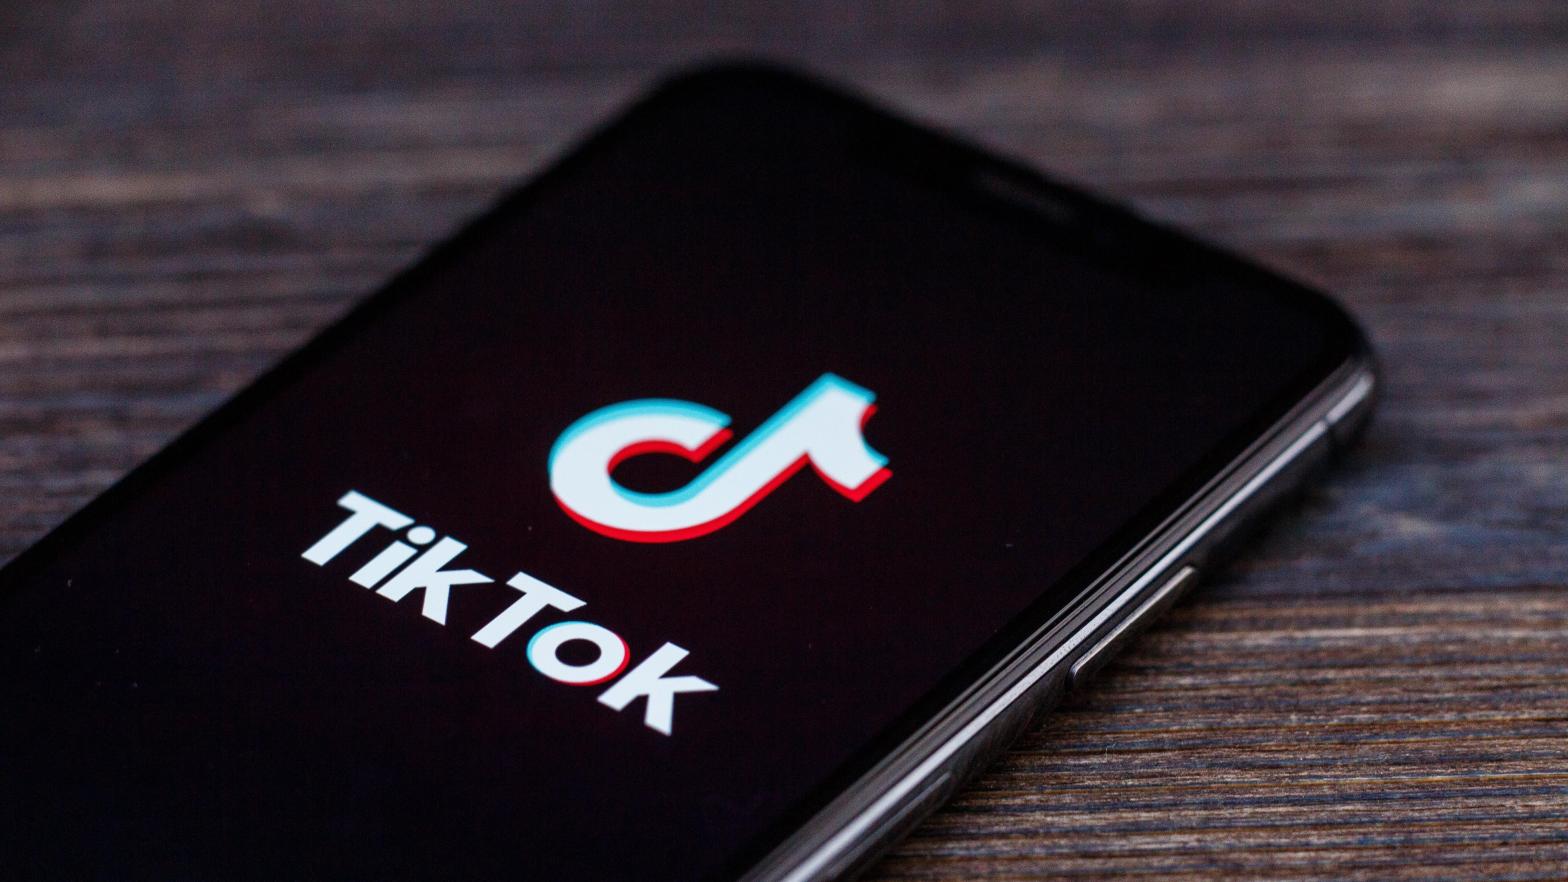 TikTok has been pursuing deals with dozens of musicians to distribute their music through ByteDance's new service called SoundOn. (Image: XanderSt, Shutterstock)